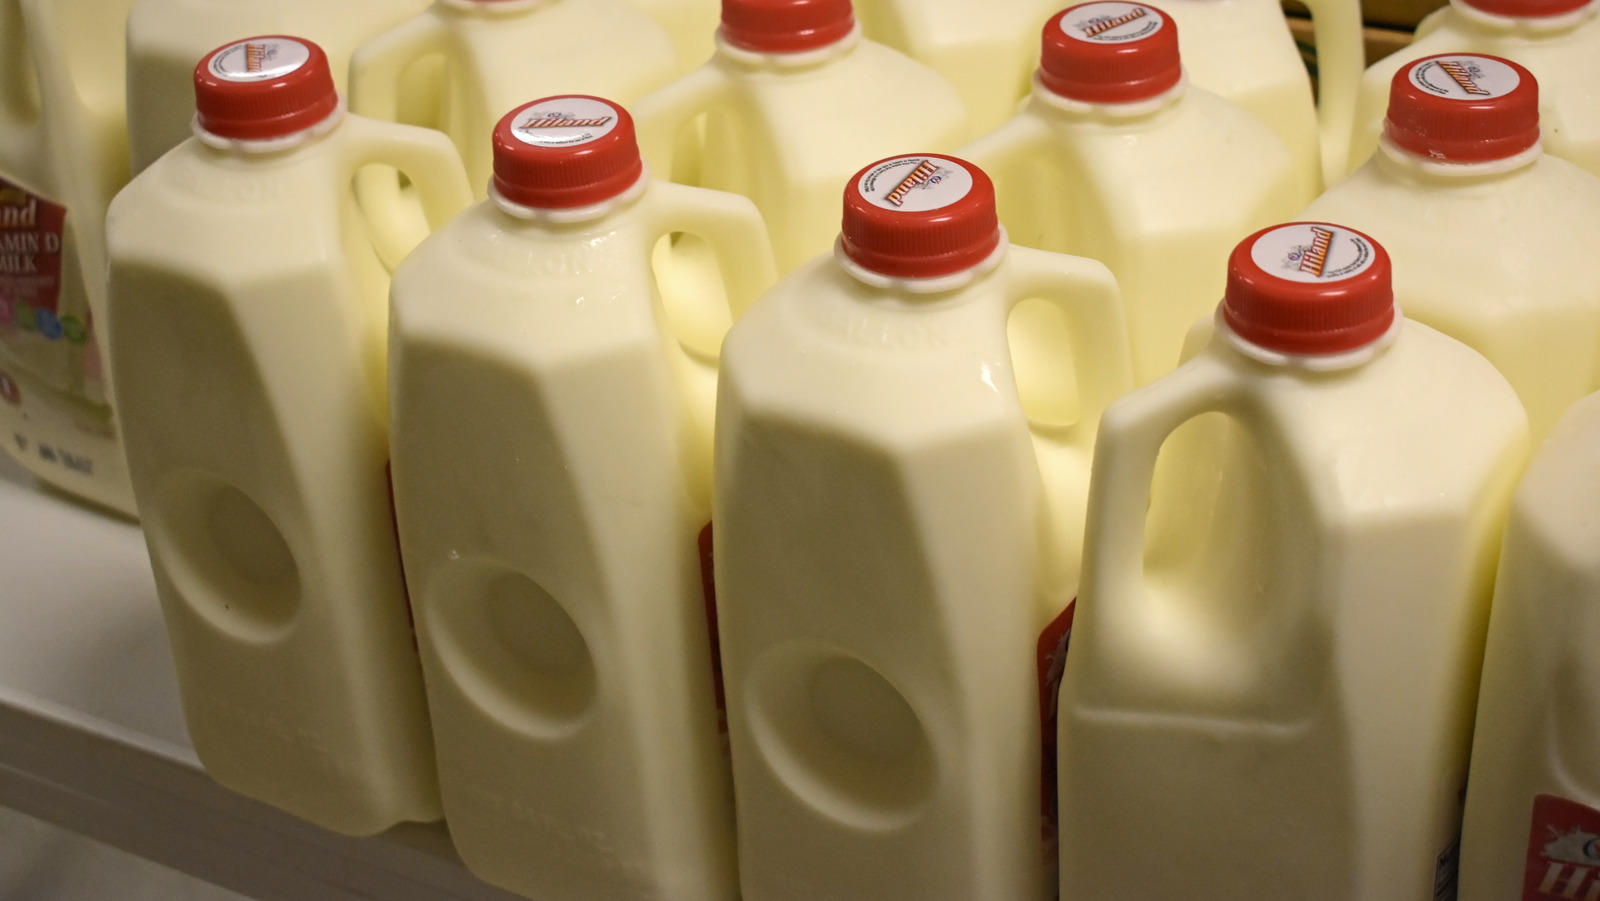 Why Do Milk Jugs Have Those Inverted Circles?